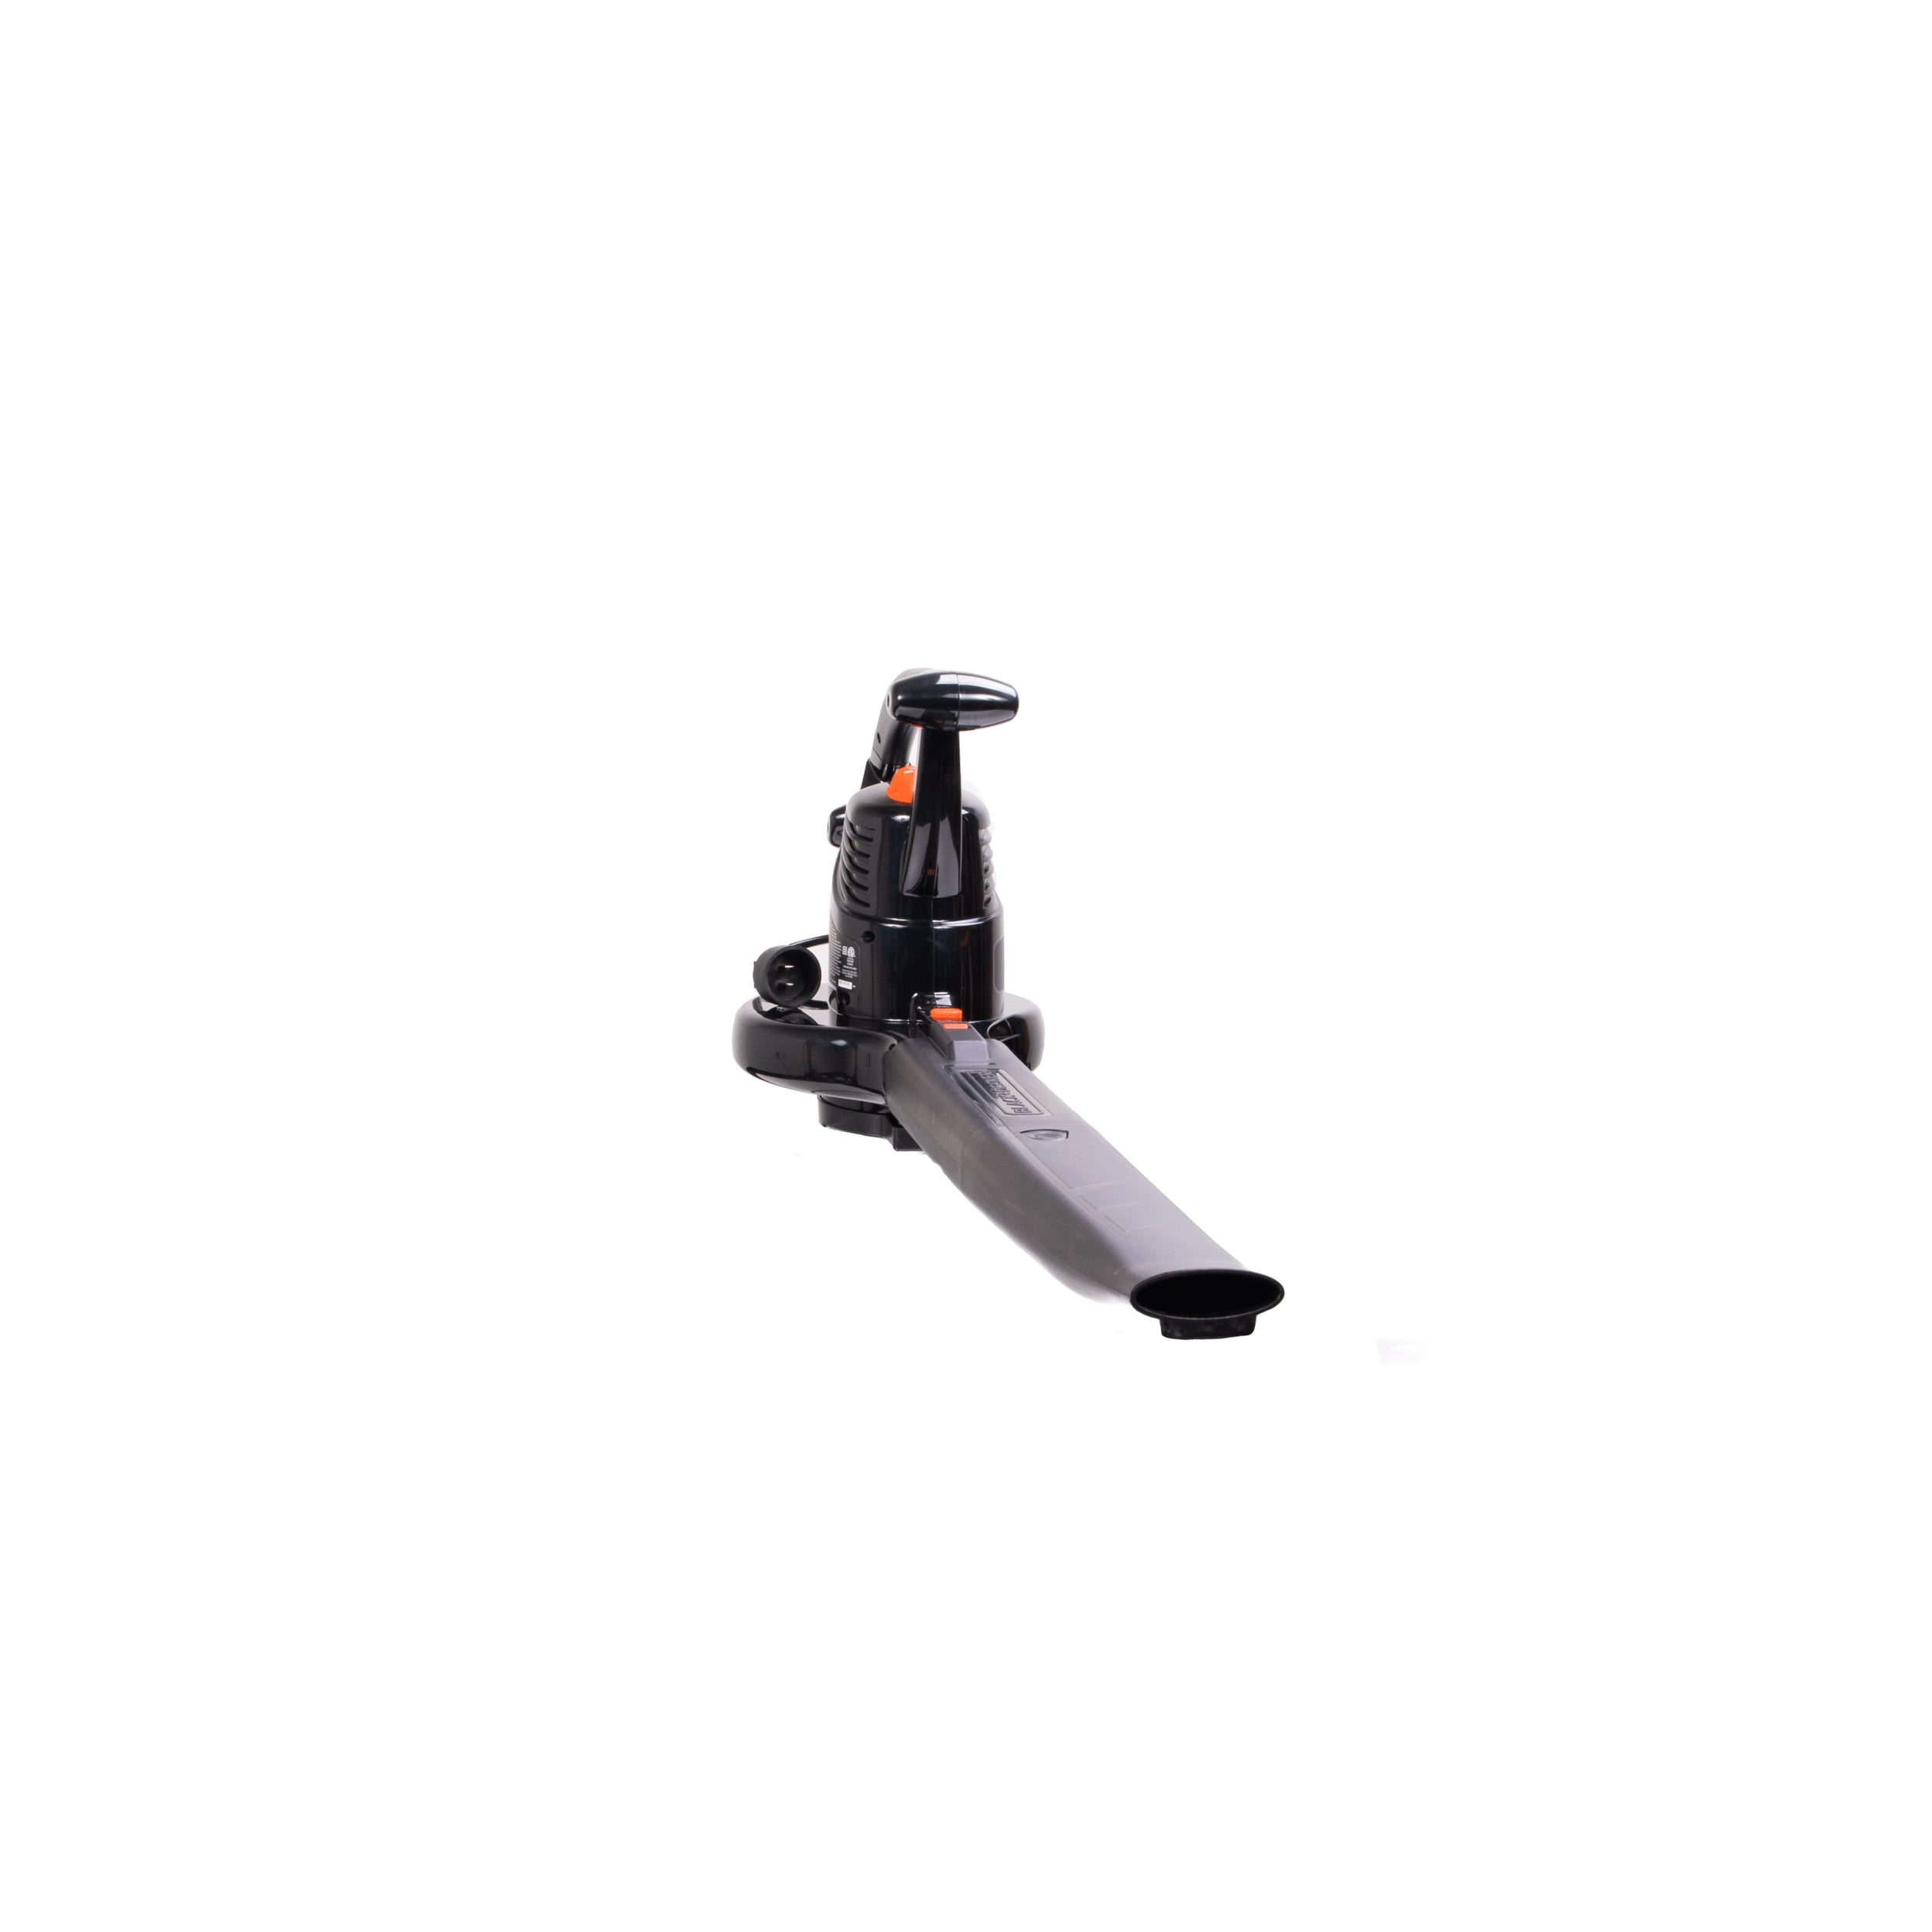 Black and Decker 12 Amp Blower/Vacuum/Mulcher BV3100 from Black and Decker  - Acme Tools